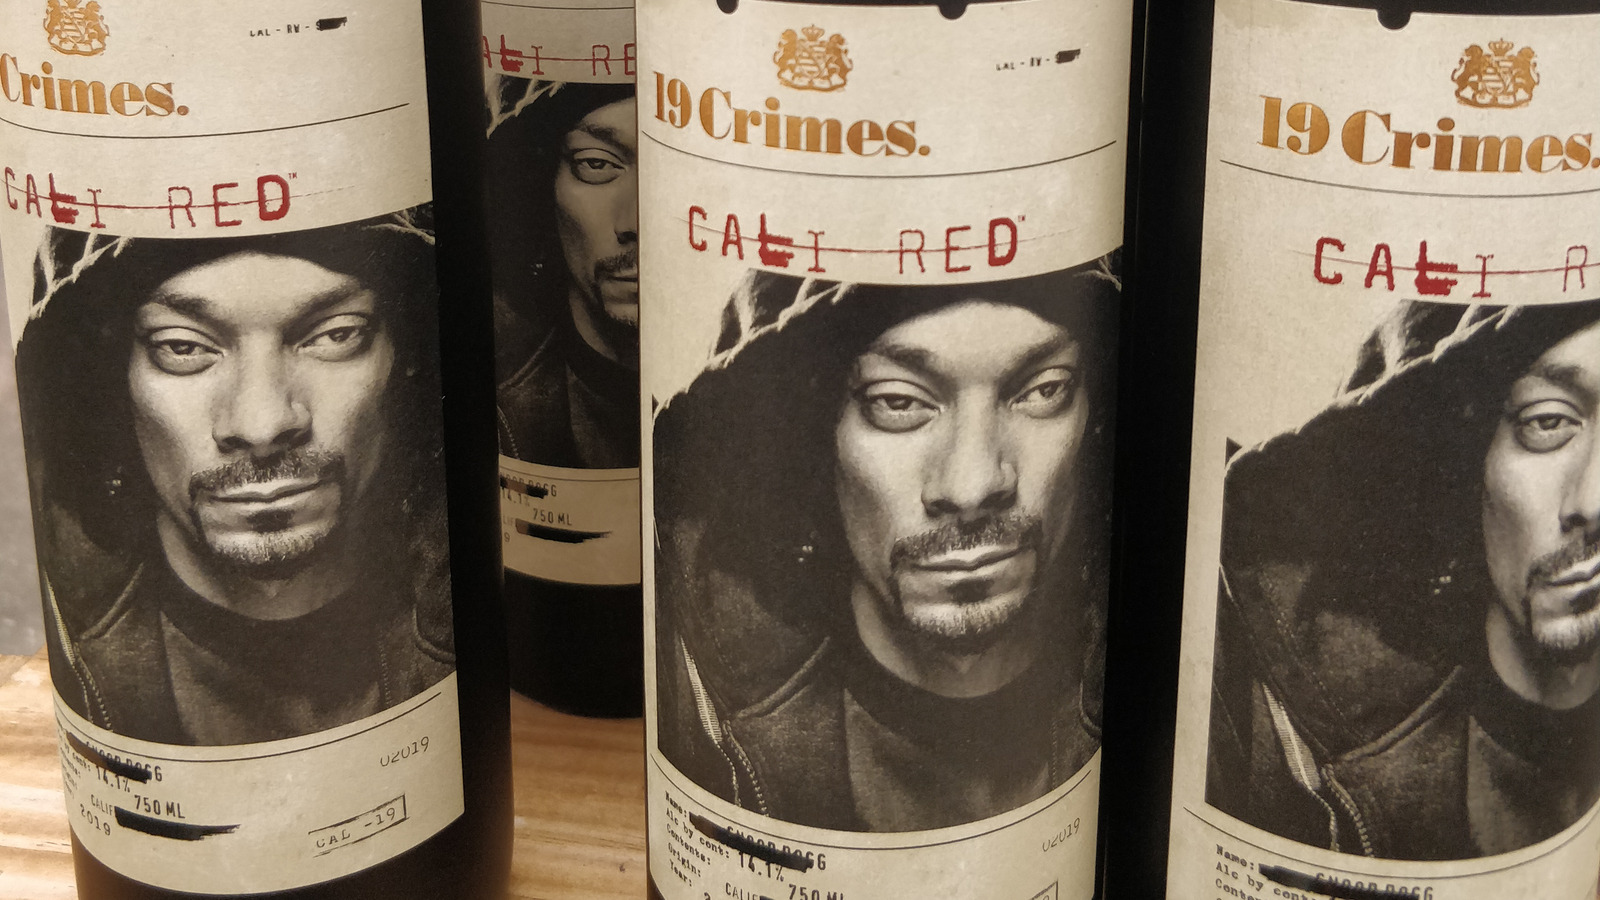 https://www.tastingtable.com/img/gallery/19-crimes-snoop-dogg-cali-red-the-ultimate-bottle-guide/l-intro-1682617123.jpg